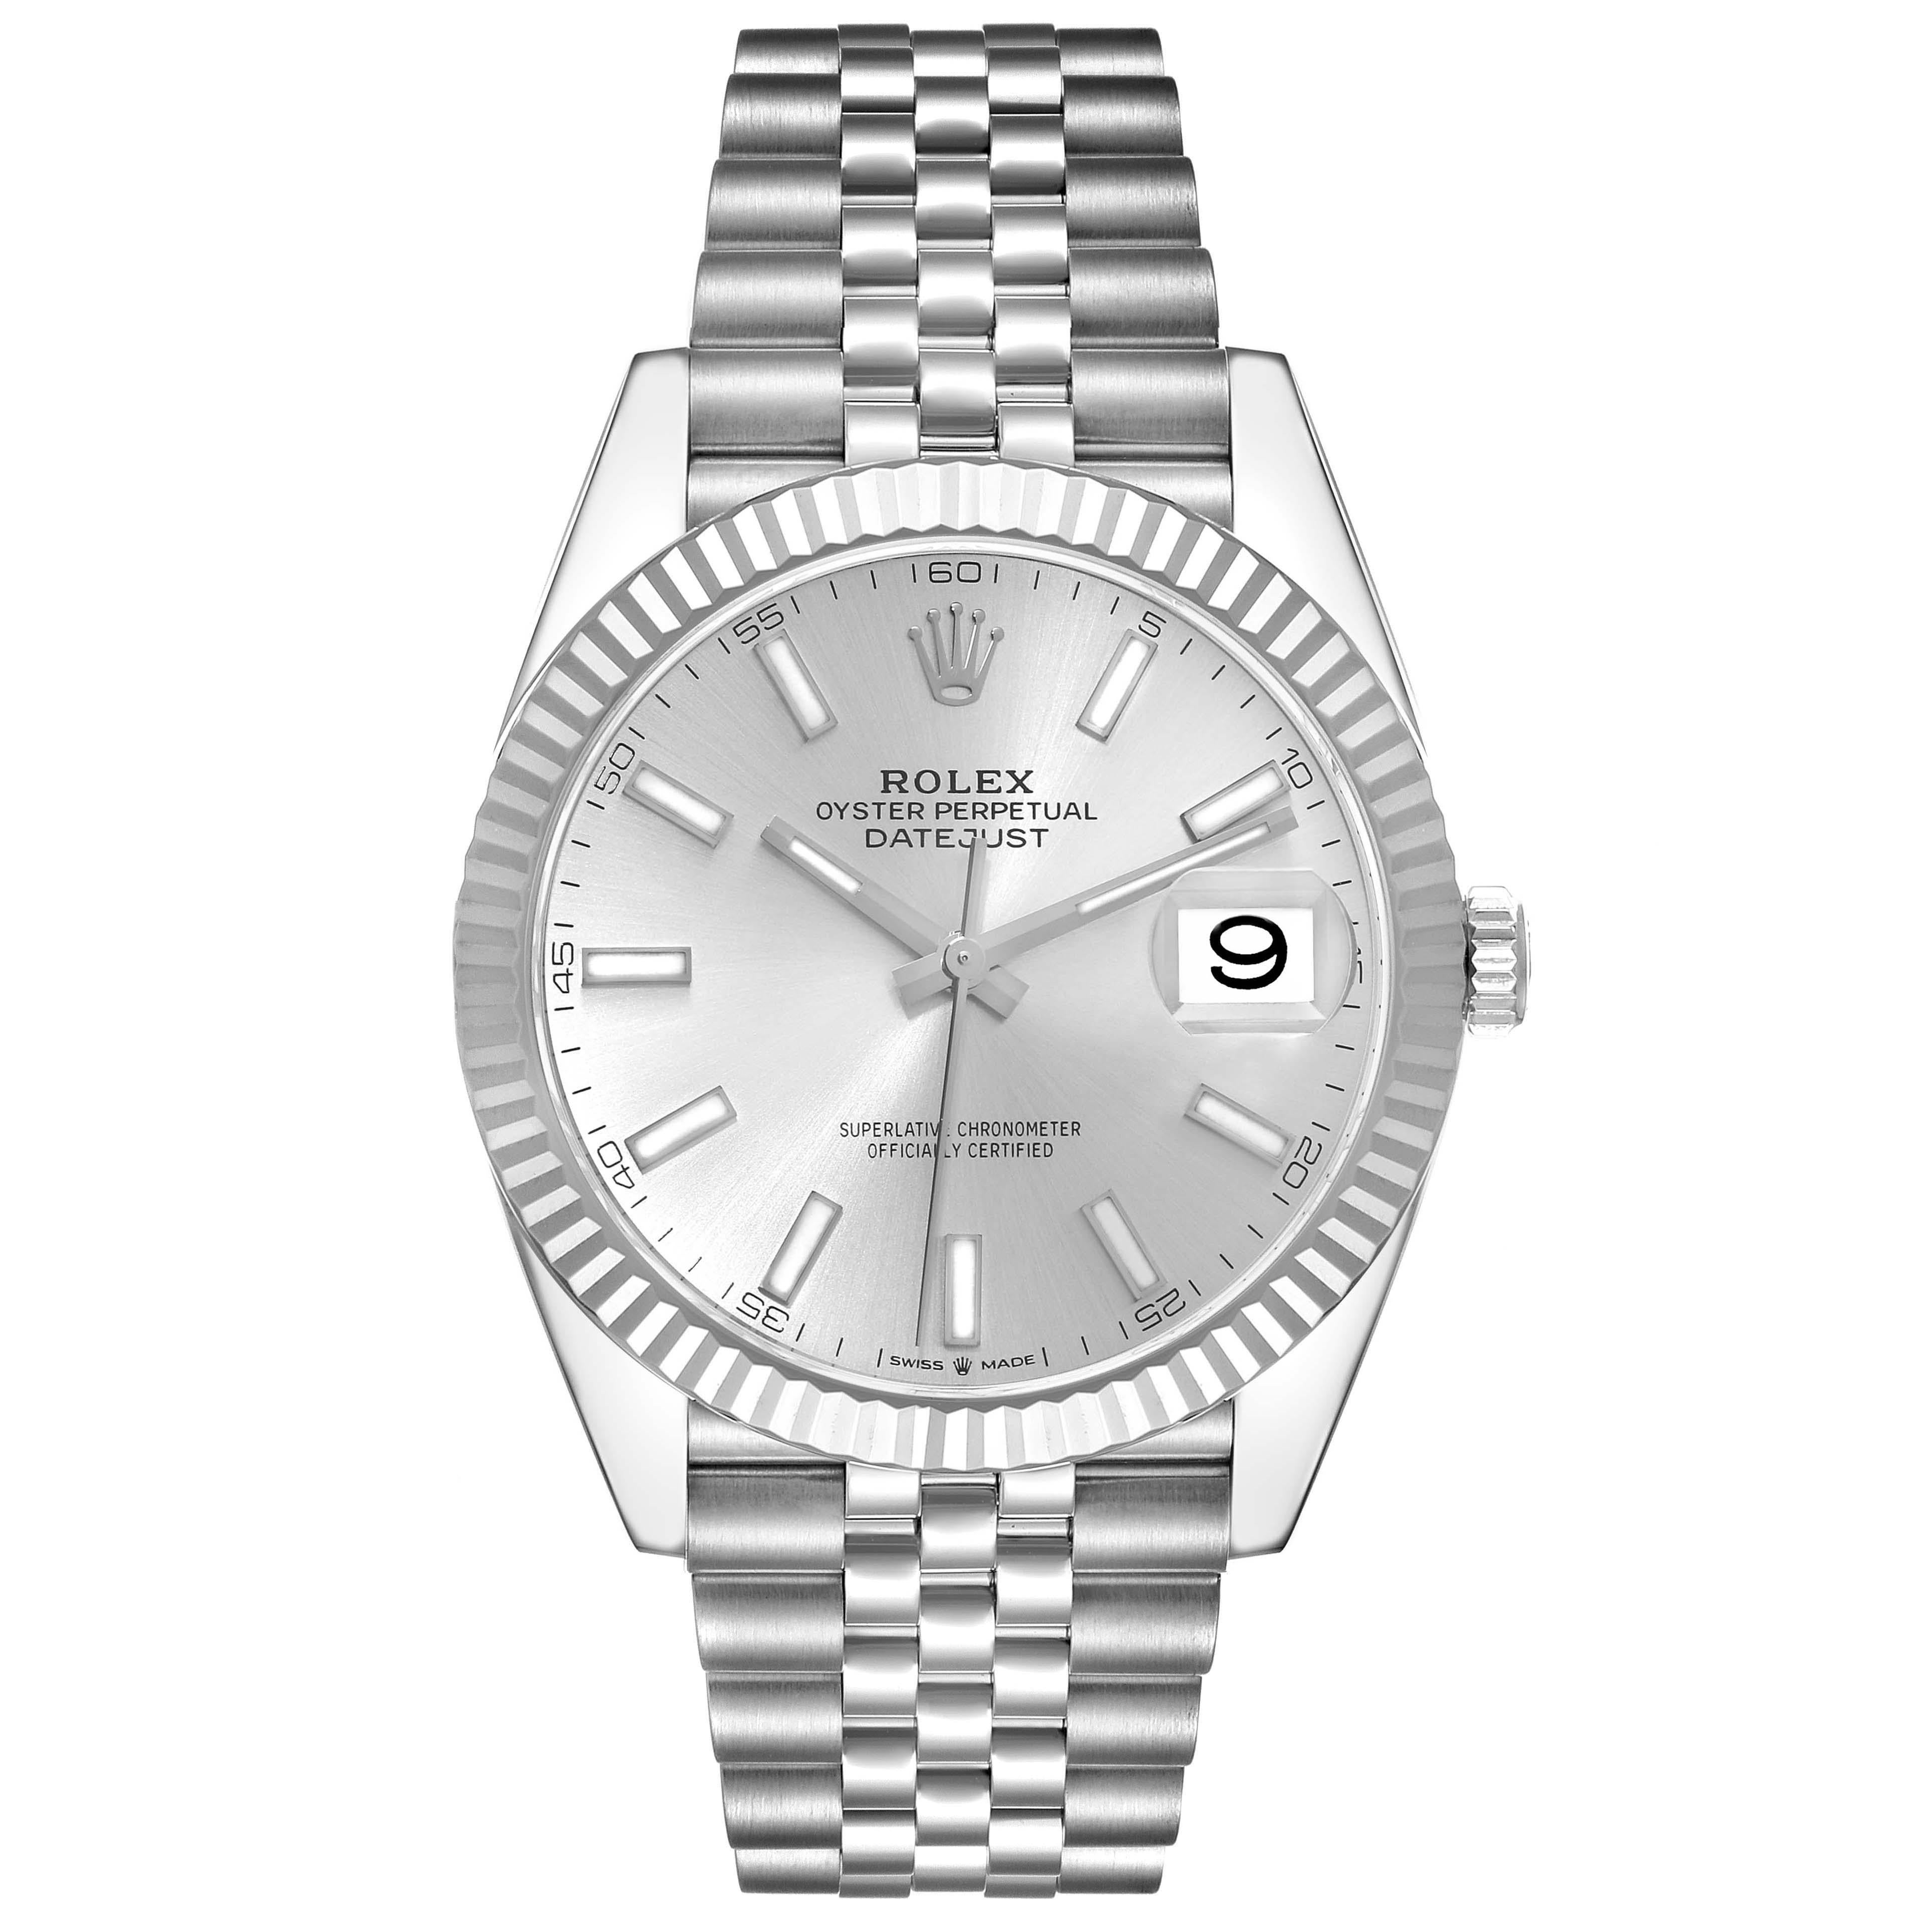 Rolex Datejust 41 Steel White Gold Silver Dial Mens Watch 126334 Box Card. Officially certified chronometer automatic self-winding movement with quickset date. Stainless steel case 41 mm in diameter. Rolex logo on the crown. 18K white gold fluted